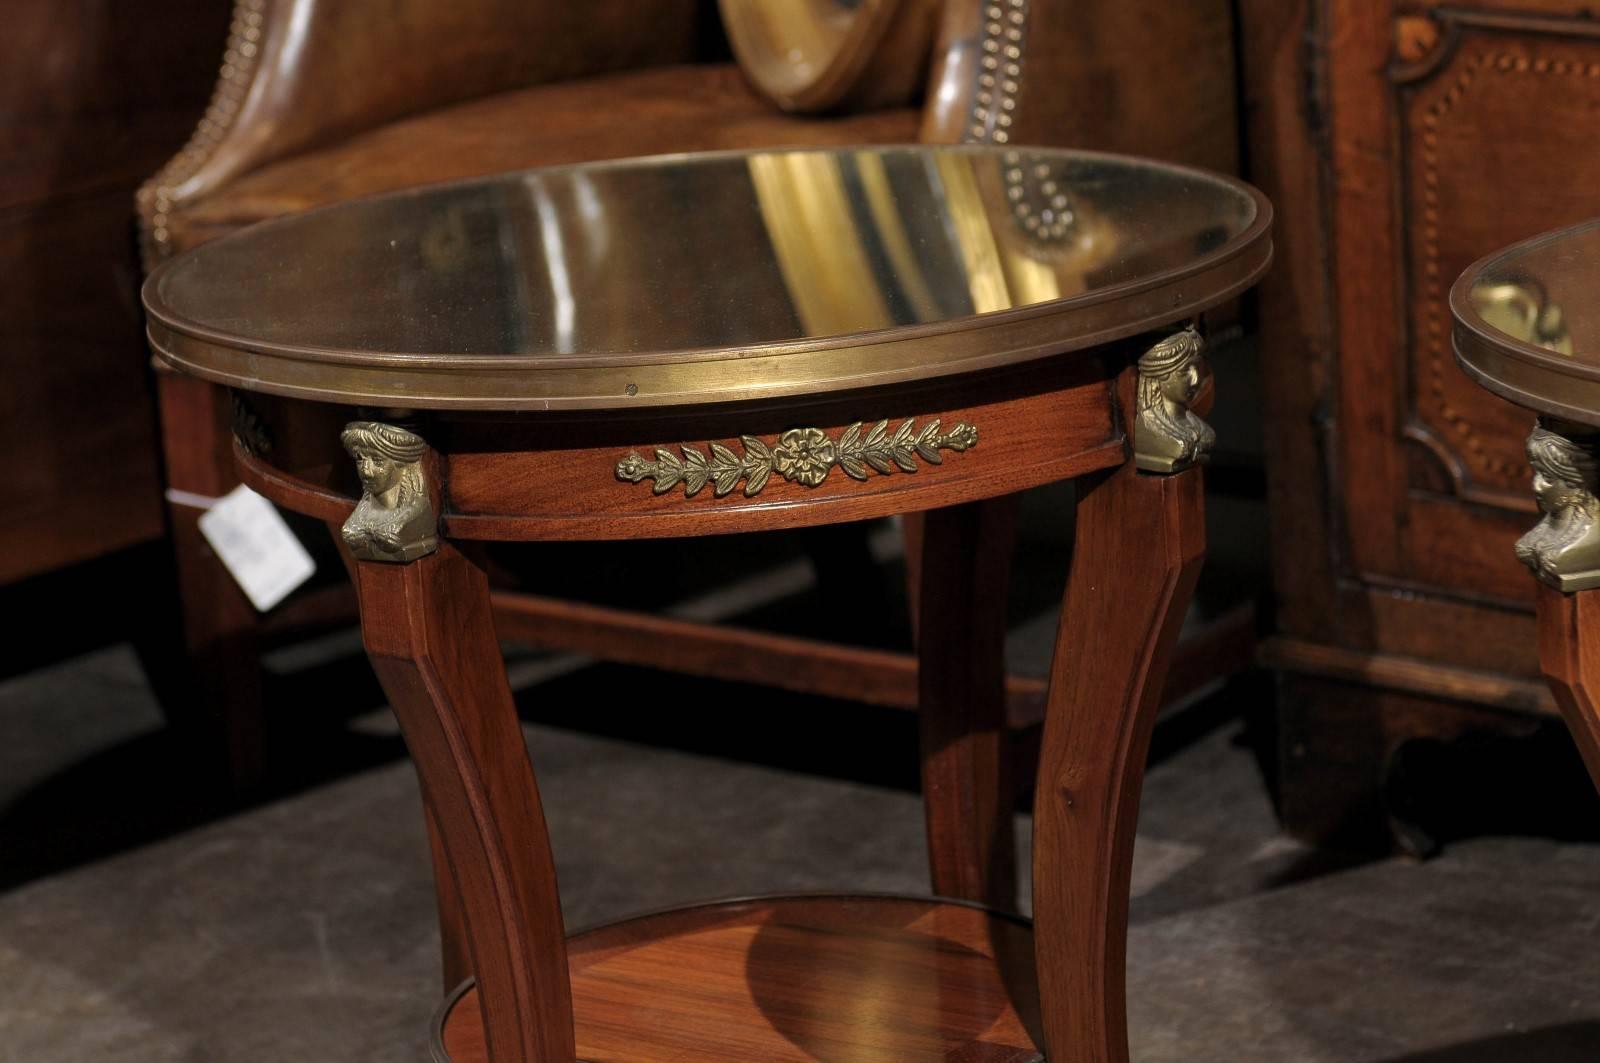 20th Century Pair of French Empire Style Low Round Accent Tables with Mirrored Tops and Shelf